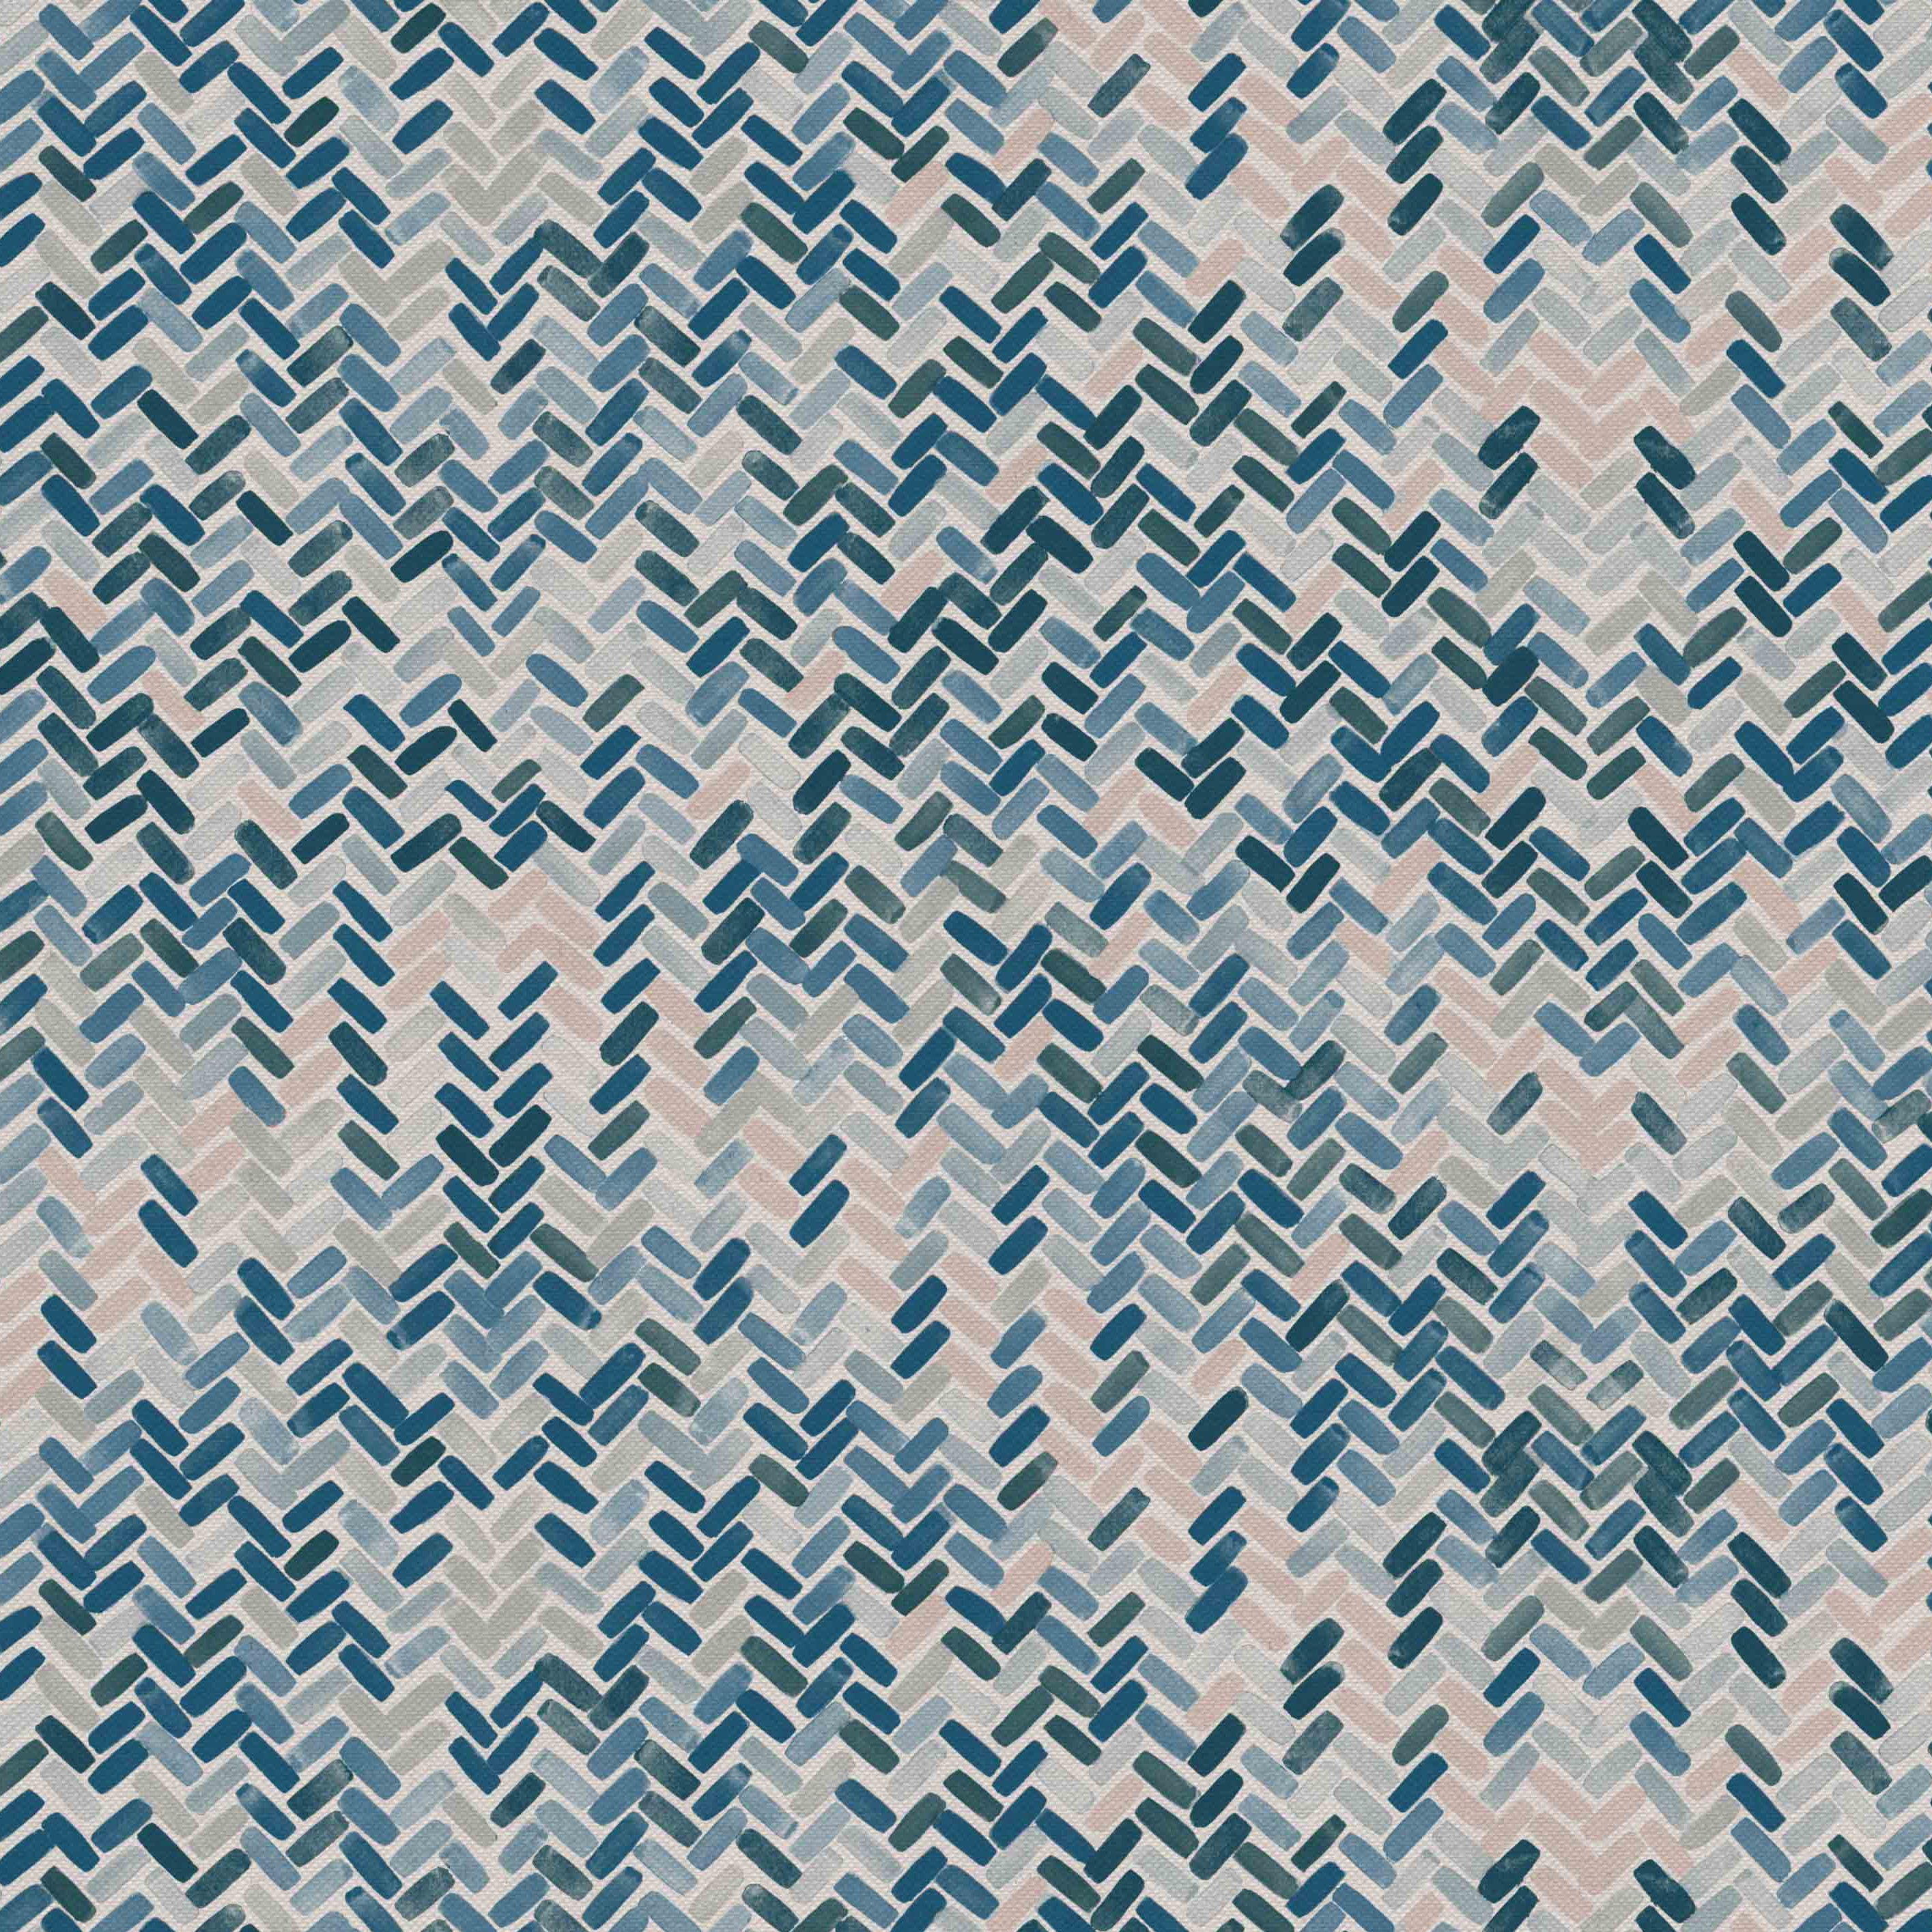 Detail of fabric in a thatched herringbone pattern in shades of pink, blue and navy.